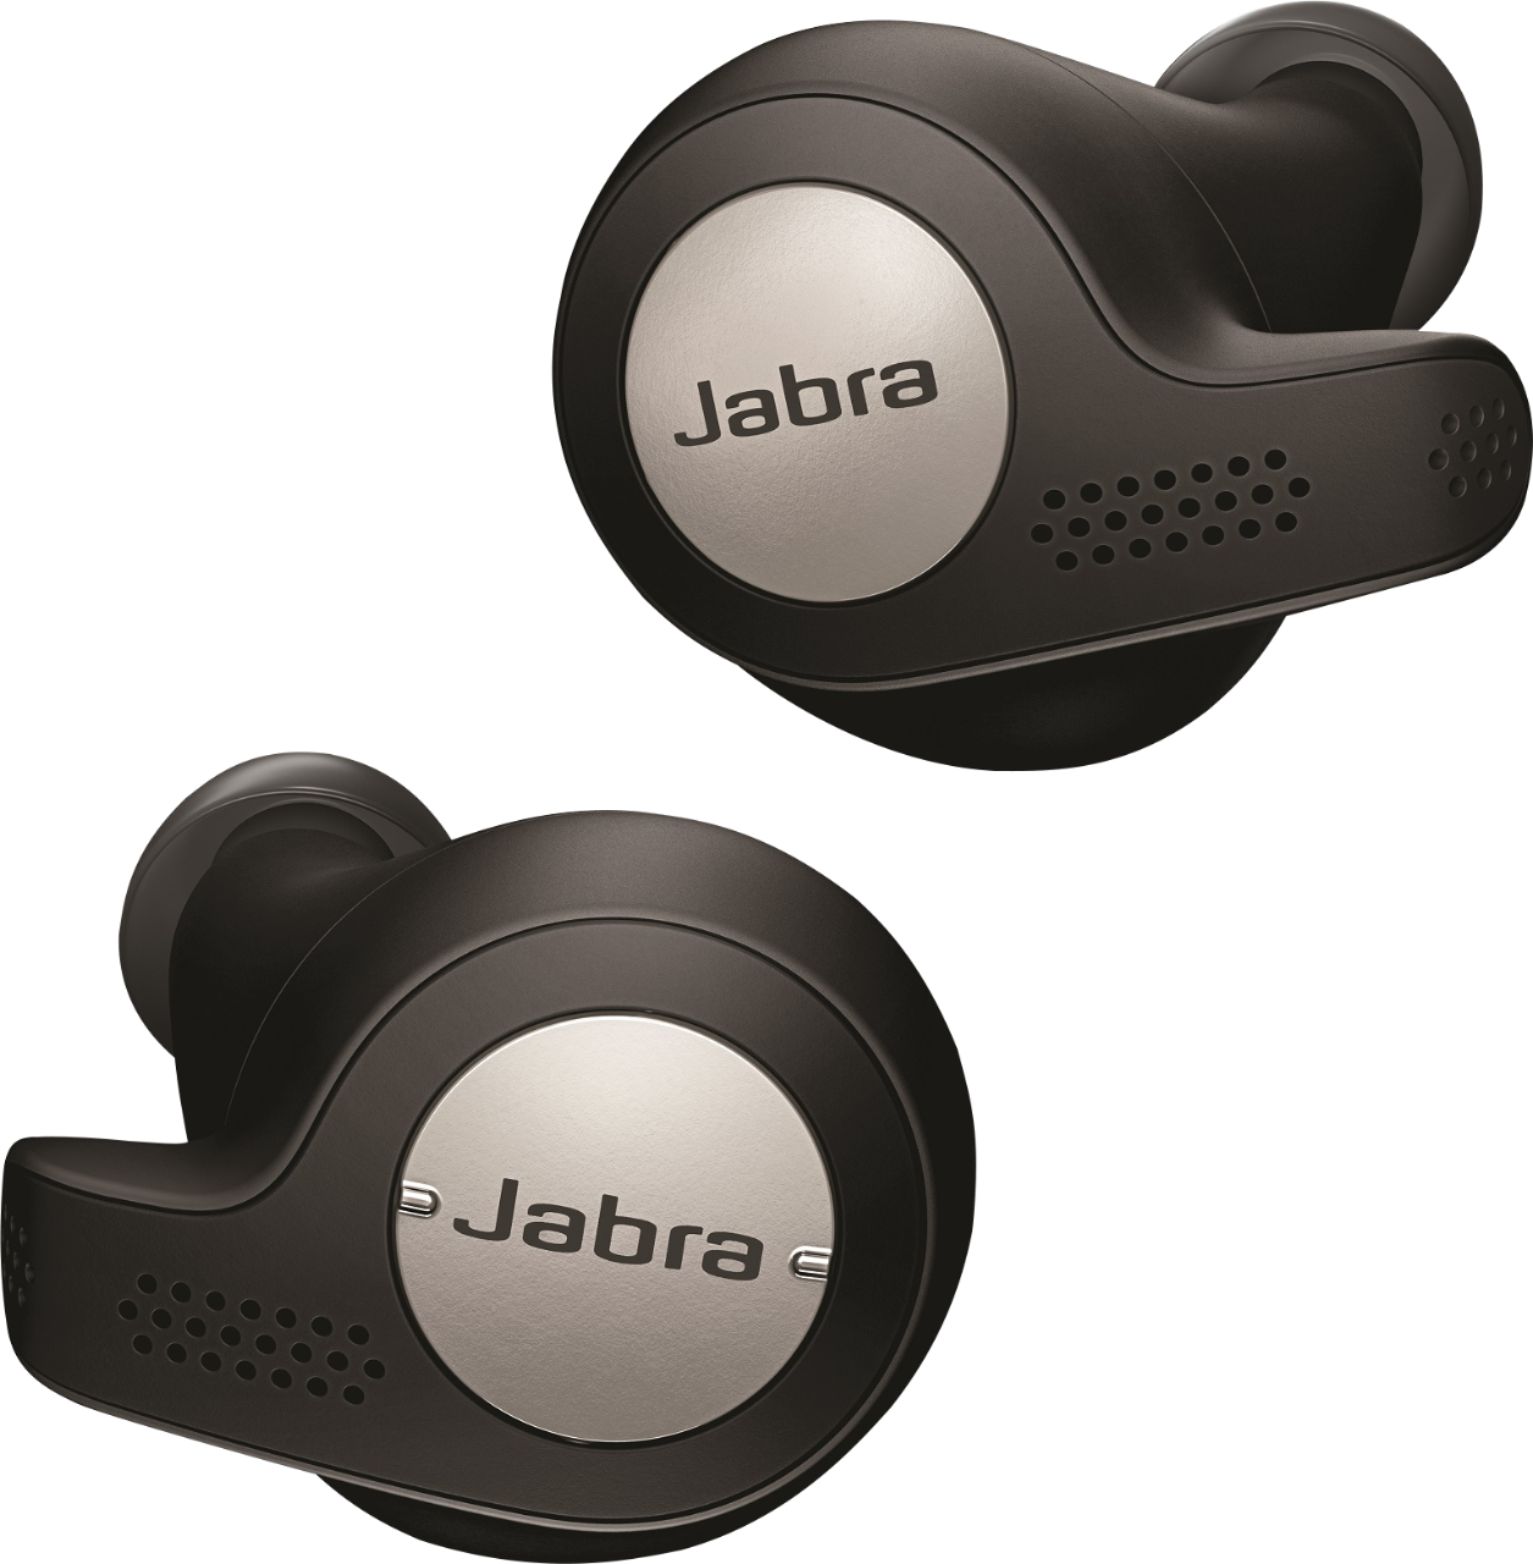  Jabra Elite 5 True Wireless in-Ear Bluetooth Earbuds - Hybrid  Active Noise Cancellation (ANC), 6 Built-in Microphones for Clear Calls -  Titanium Black, with $25  Gift Card : Electronics